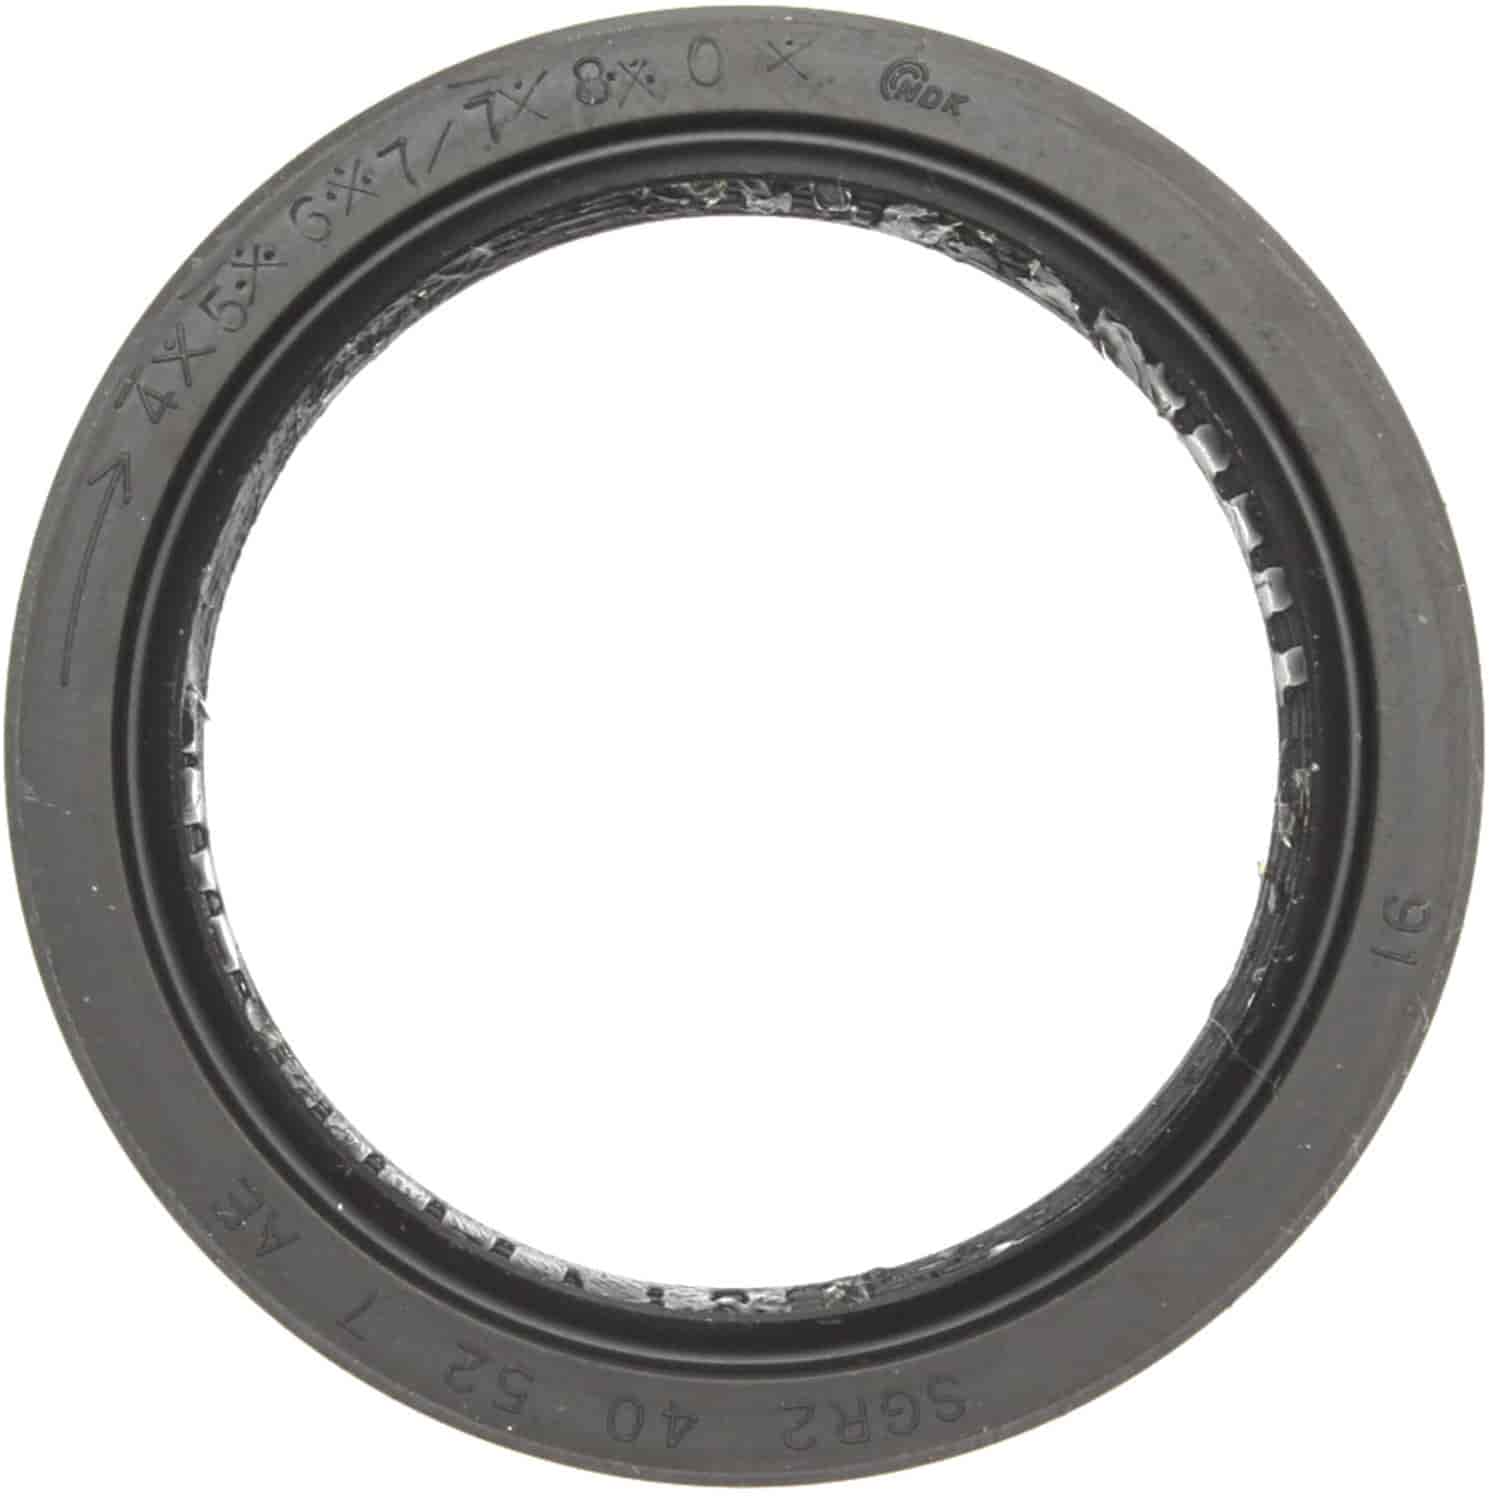 Timing Cover Seal Datsun for Nissan Pulsar NX-SE w/1597cc CA16DE Eng. 1987 TIMING COVER SEAL